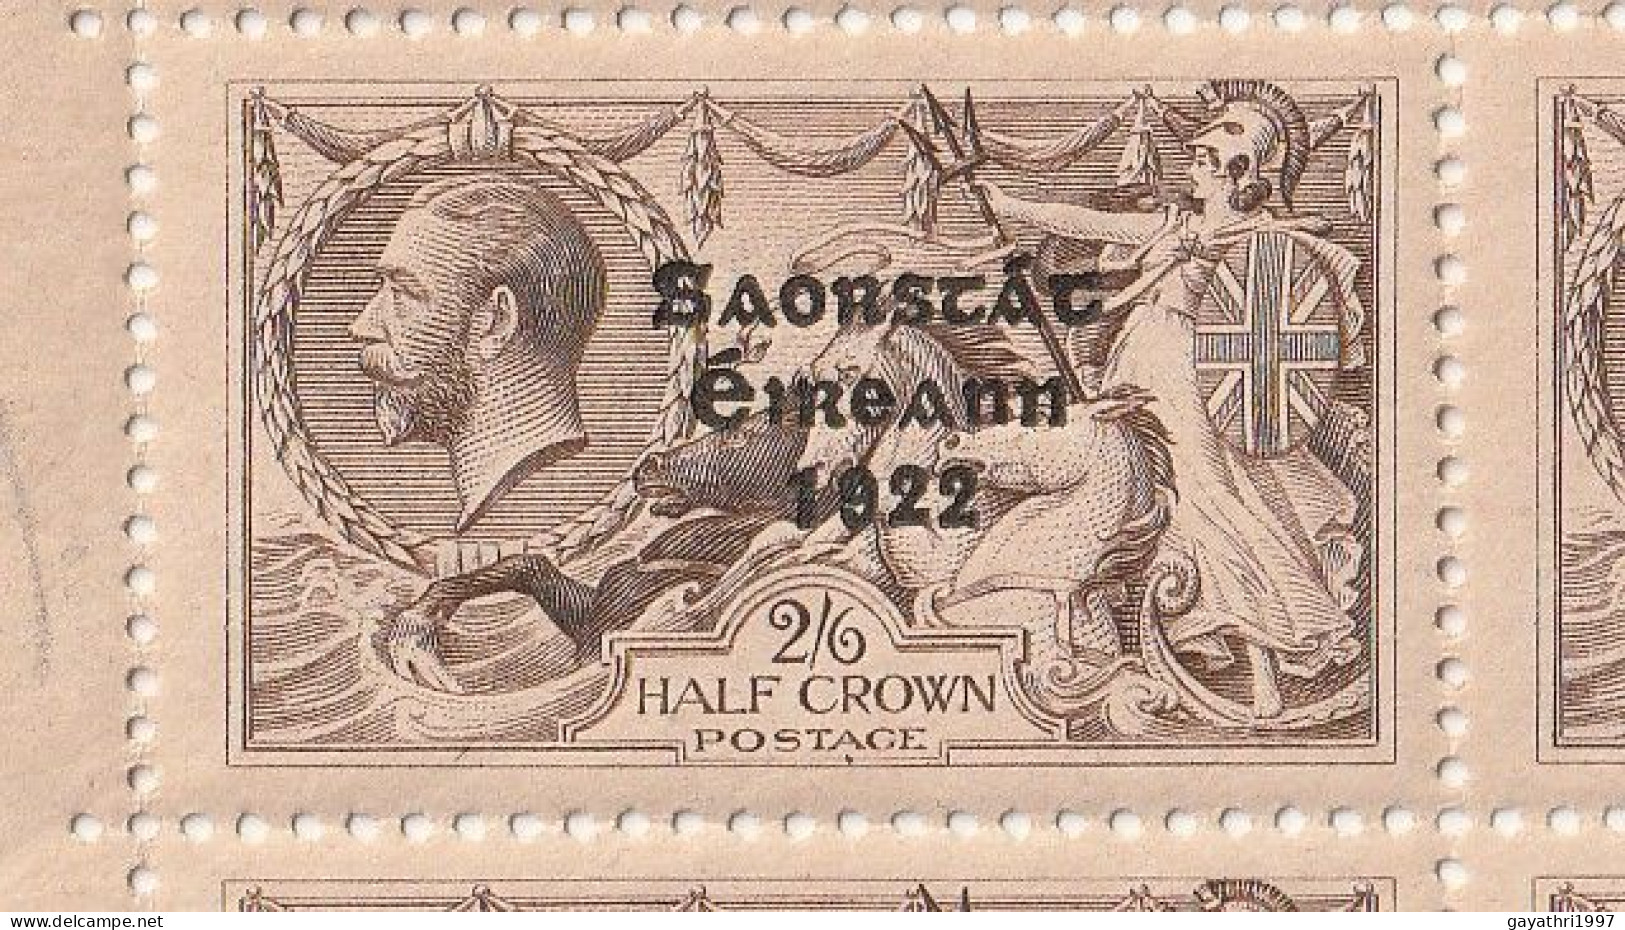 Ireland 1922-23 Irish free state SG64? with Variety DOT after S IN many STAMPS,TOTAL19 STAMPS .block OF 12 AND Block of6